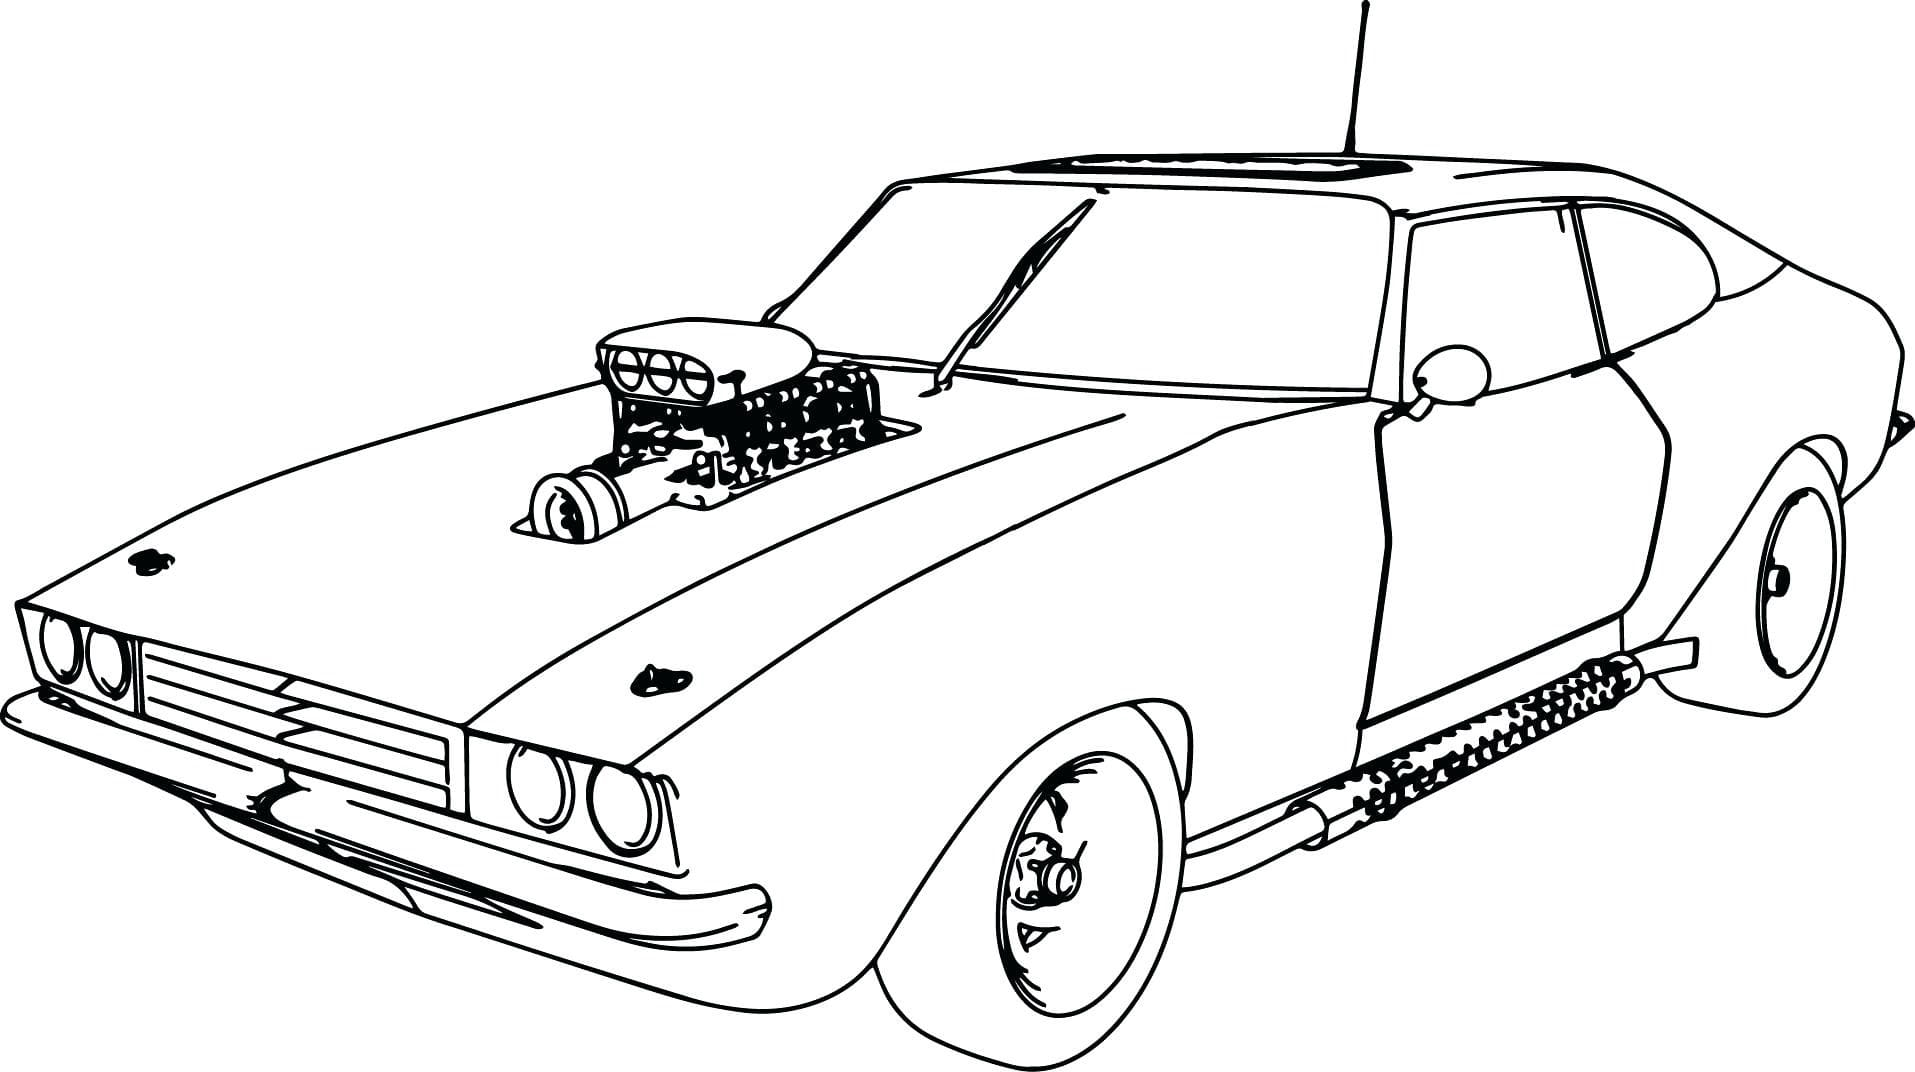 Coloring page Race cars Sports car from the movie Fast and Furious